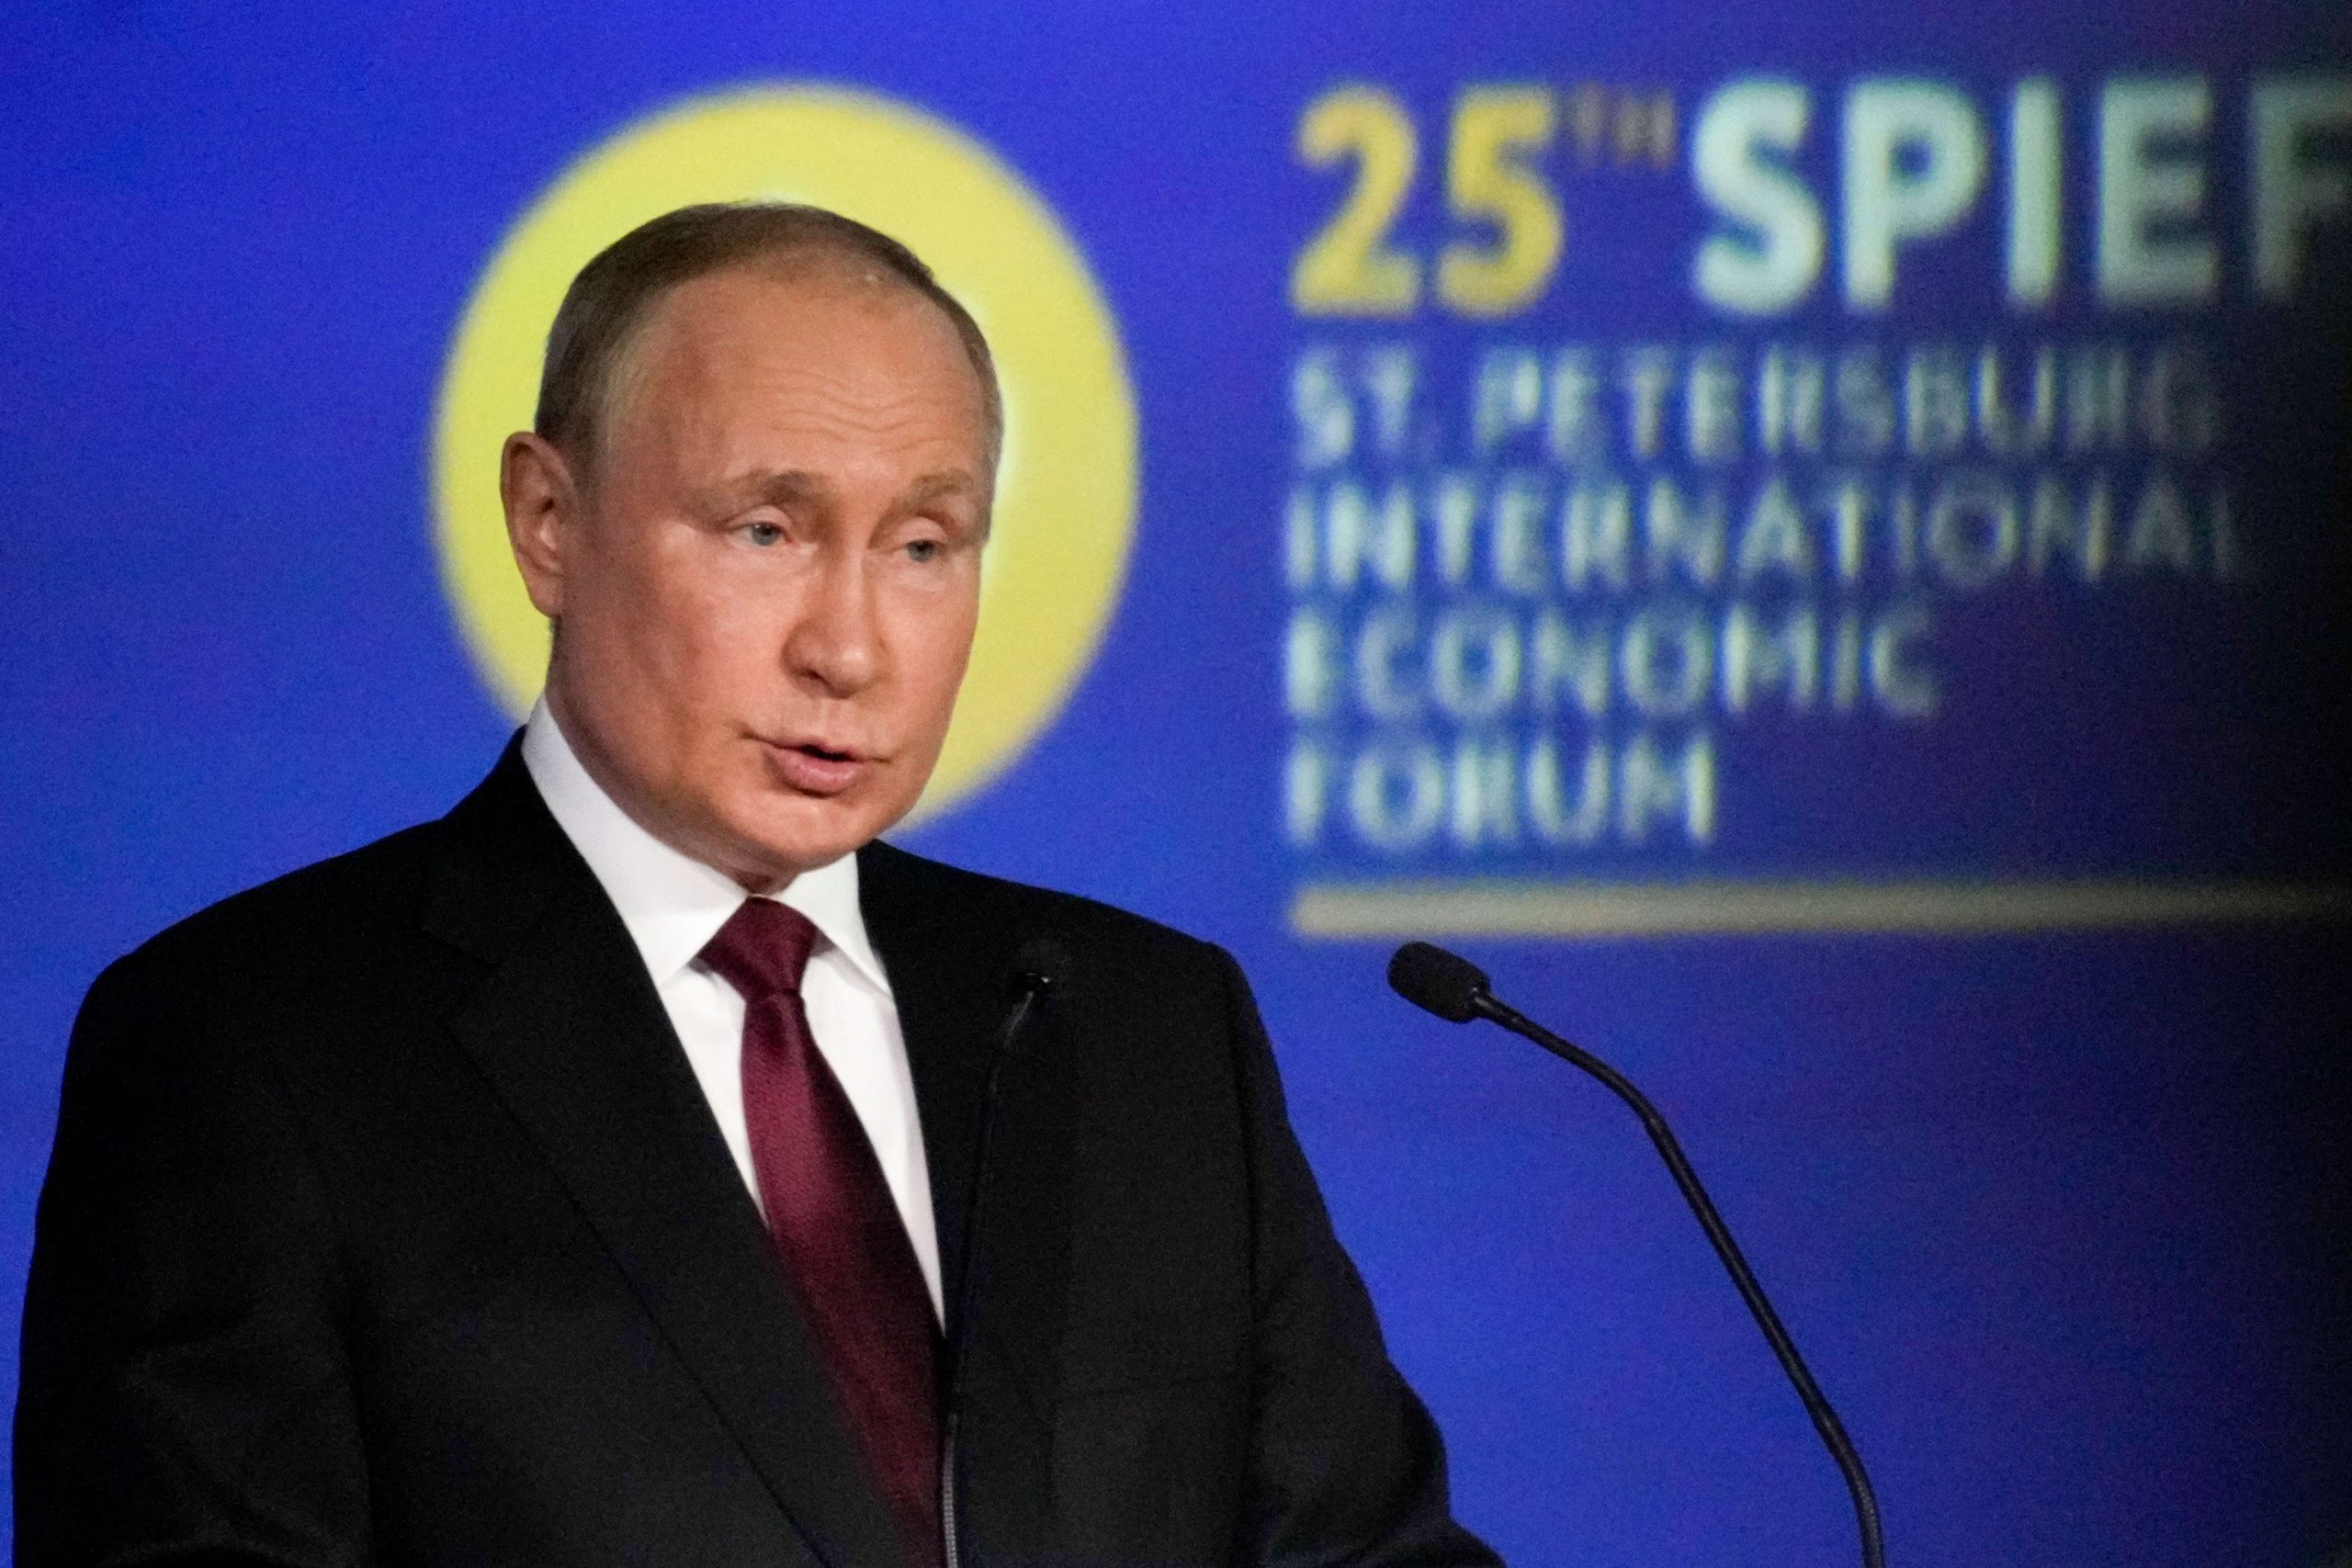 Putin: "Illegal sanctions call into question the essence of the international legal order"